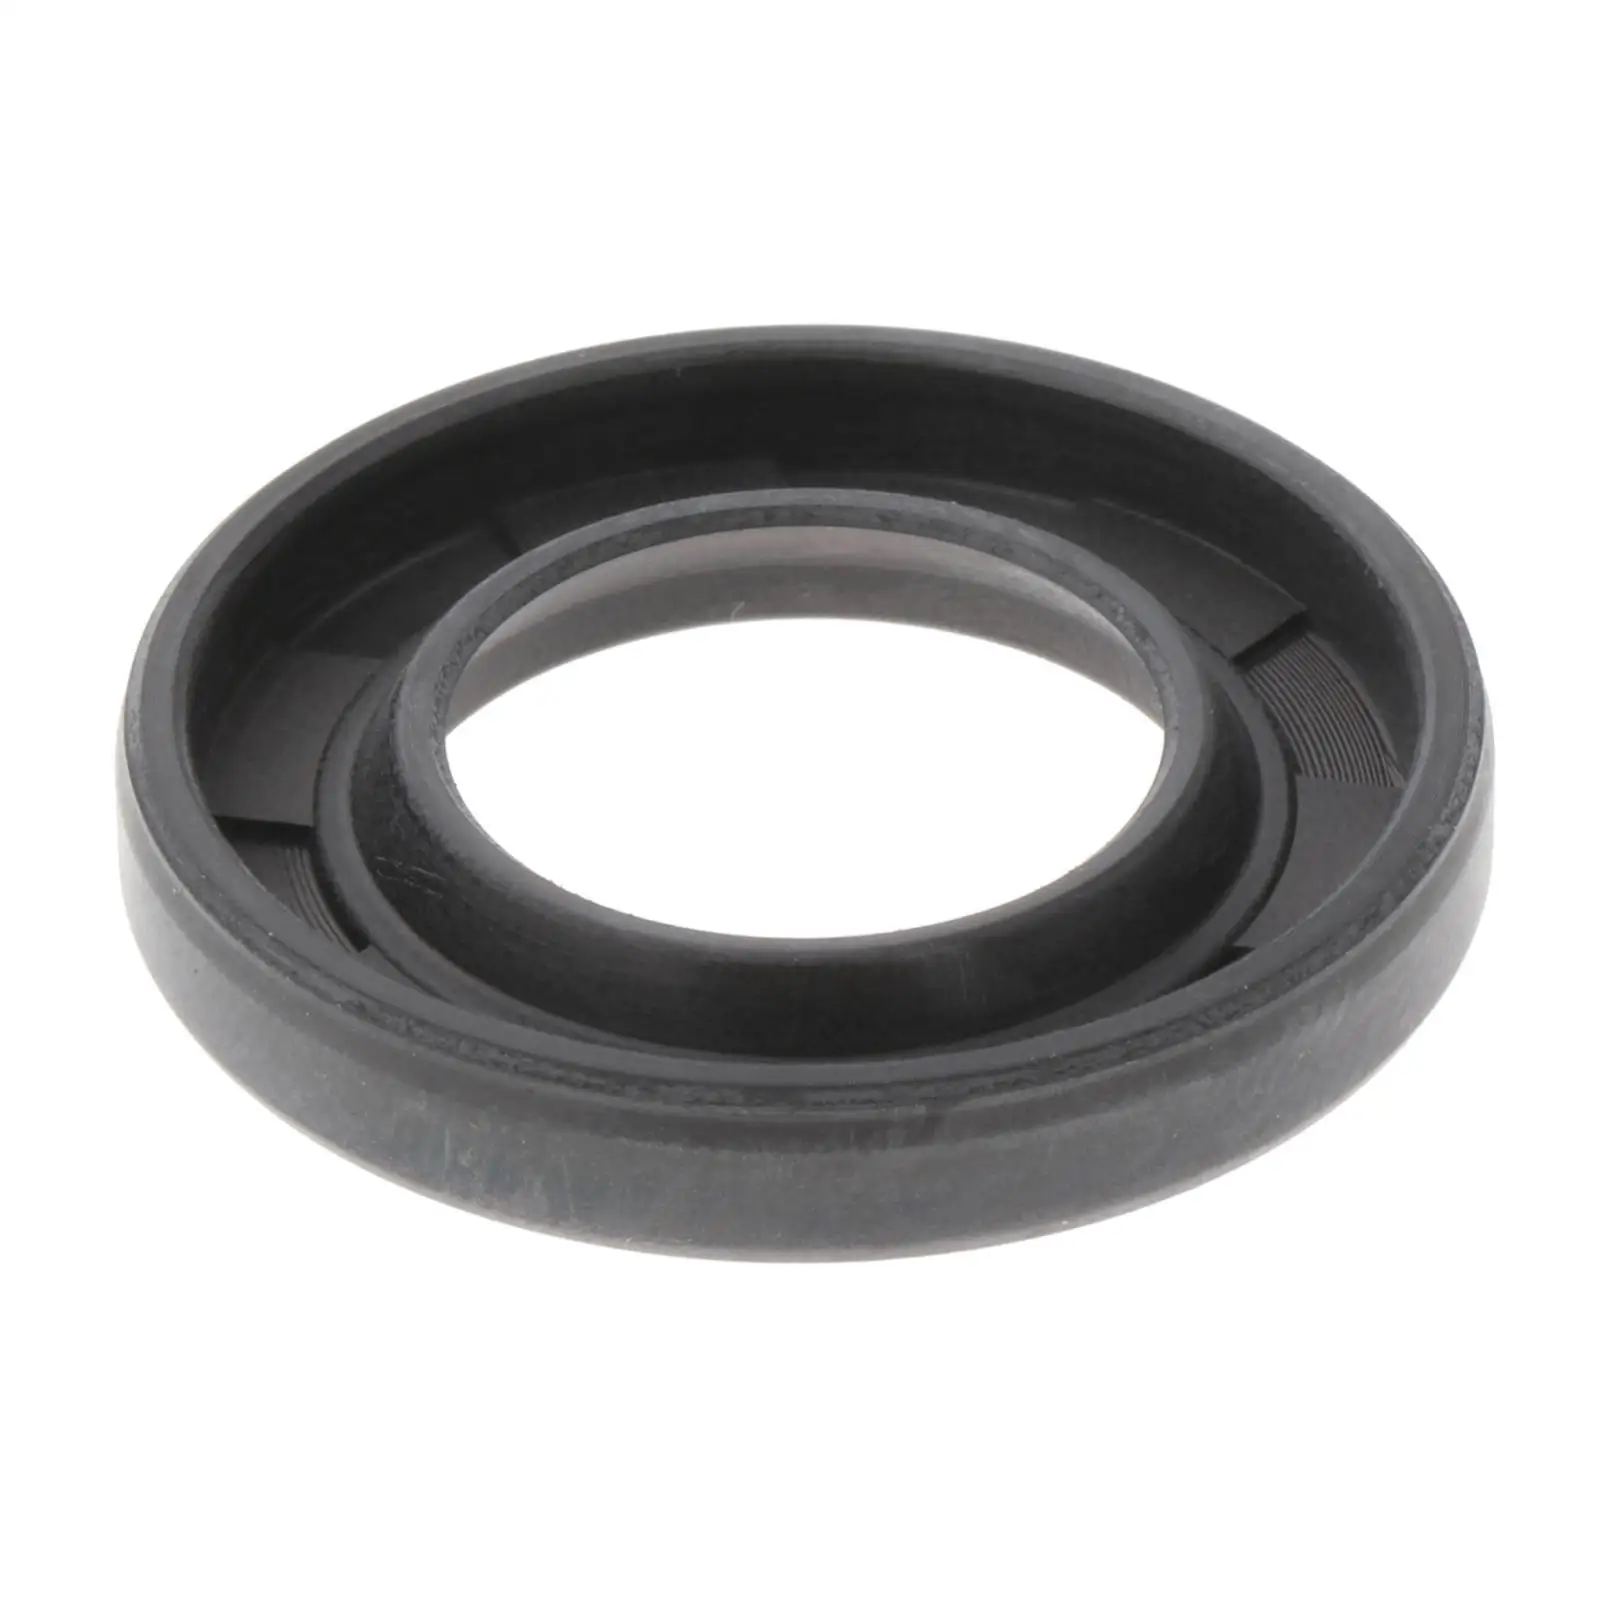 Oil Seal Spare Parts for Yamaha Outboard Motor 60HP 70HP Outboard Engine 2 Stroke